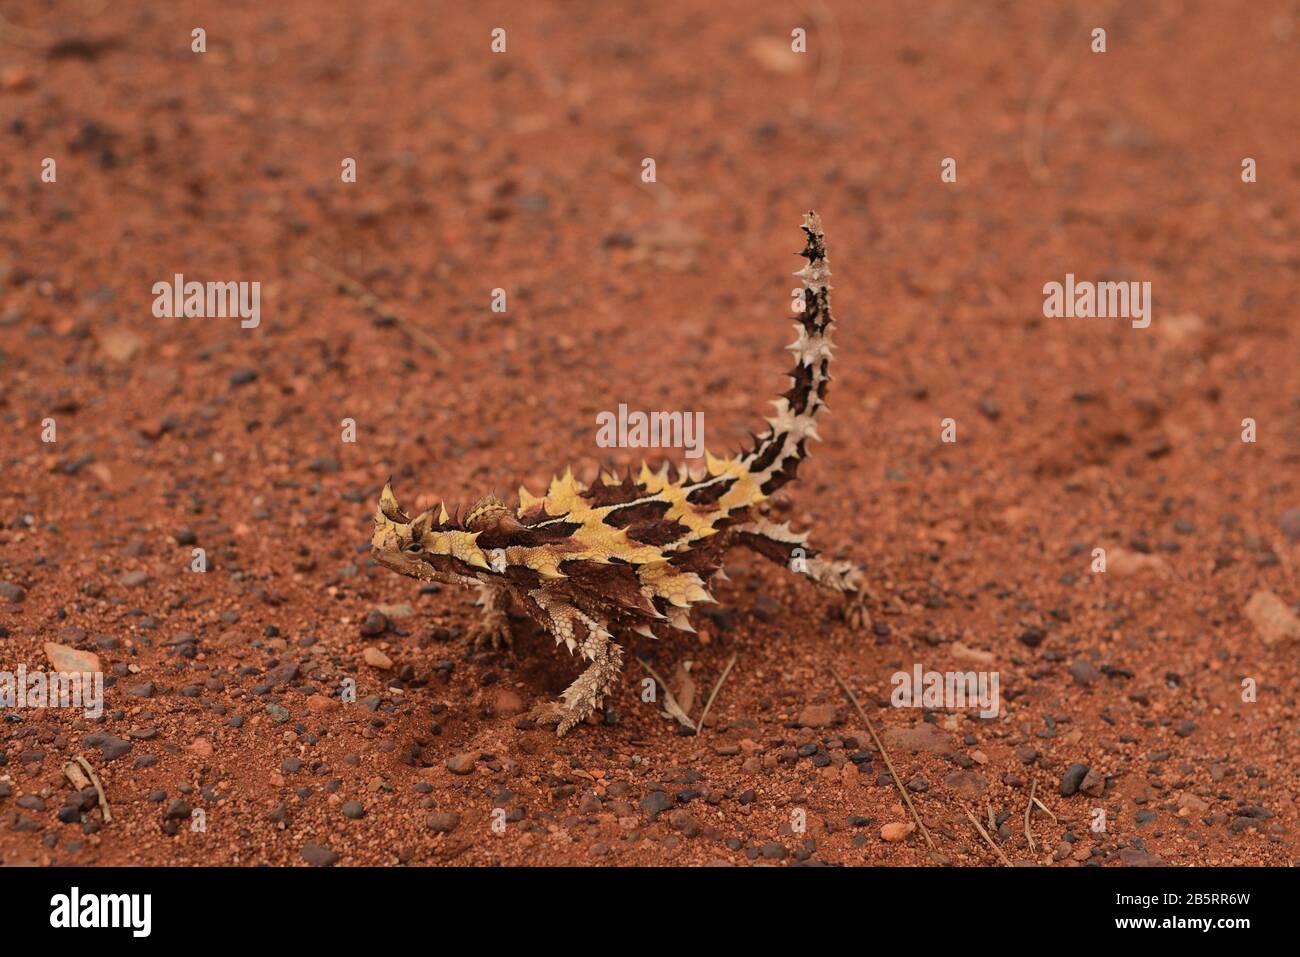 A small Thorny Devil lizard on red desert sand in arid scrub with thorn-shape spines and rust red of outback Central Australia, tail held in an upward Stock Photo